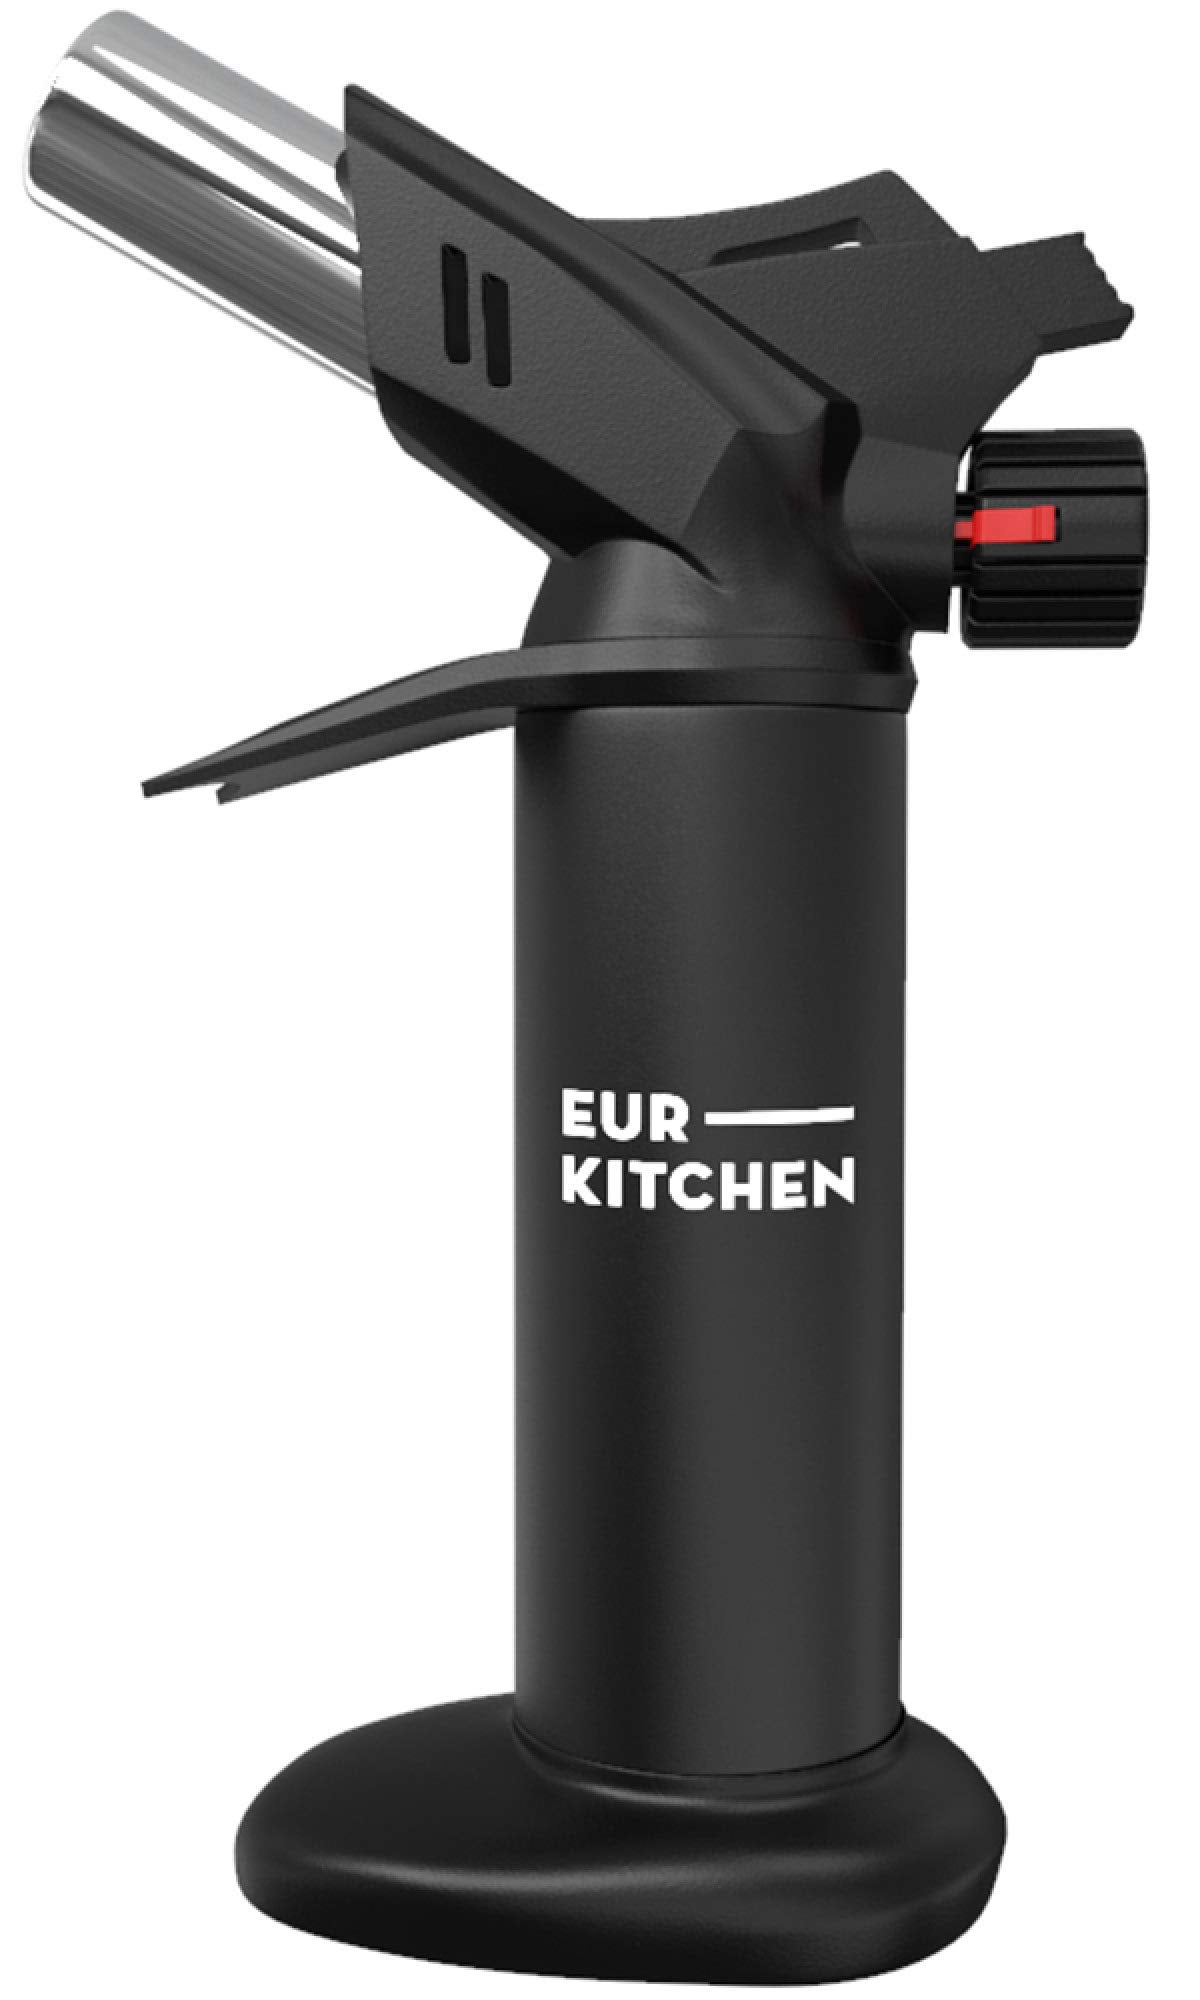 Butane Kitchen Blow Torch Lighter Butane Gas Not Included -Black Refillable Culinary Cooking Torch Adjustable Flame with Safety Lock for Creme Brulee,bbq,Baking Desert and Soldering. 